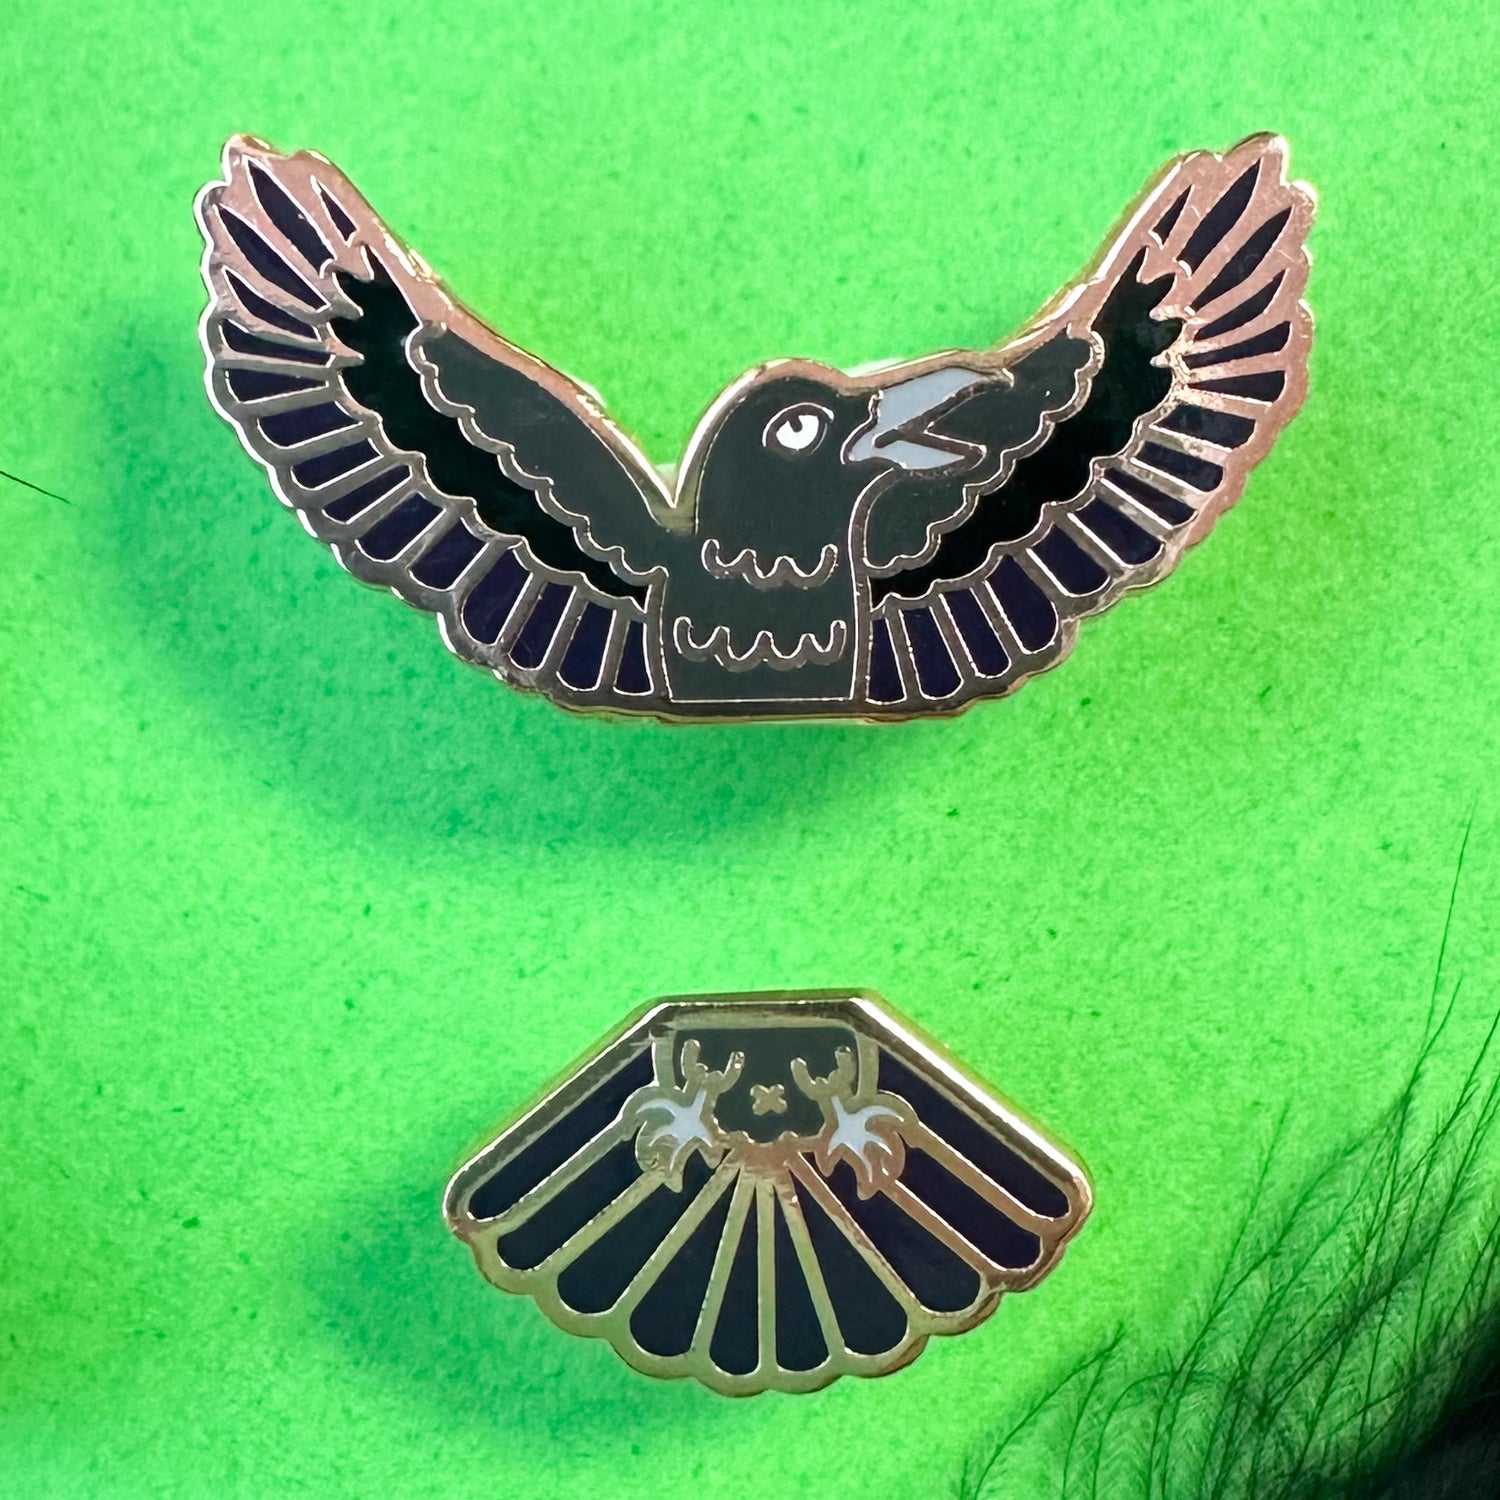 Two pins that come together in the middle to form a raven. The pin is on a green background with feathers in one corner. 